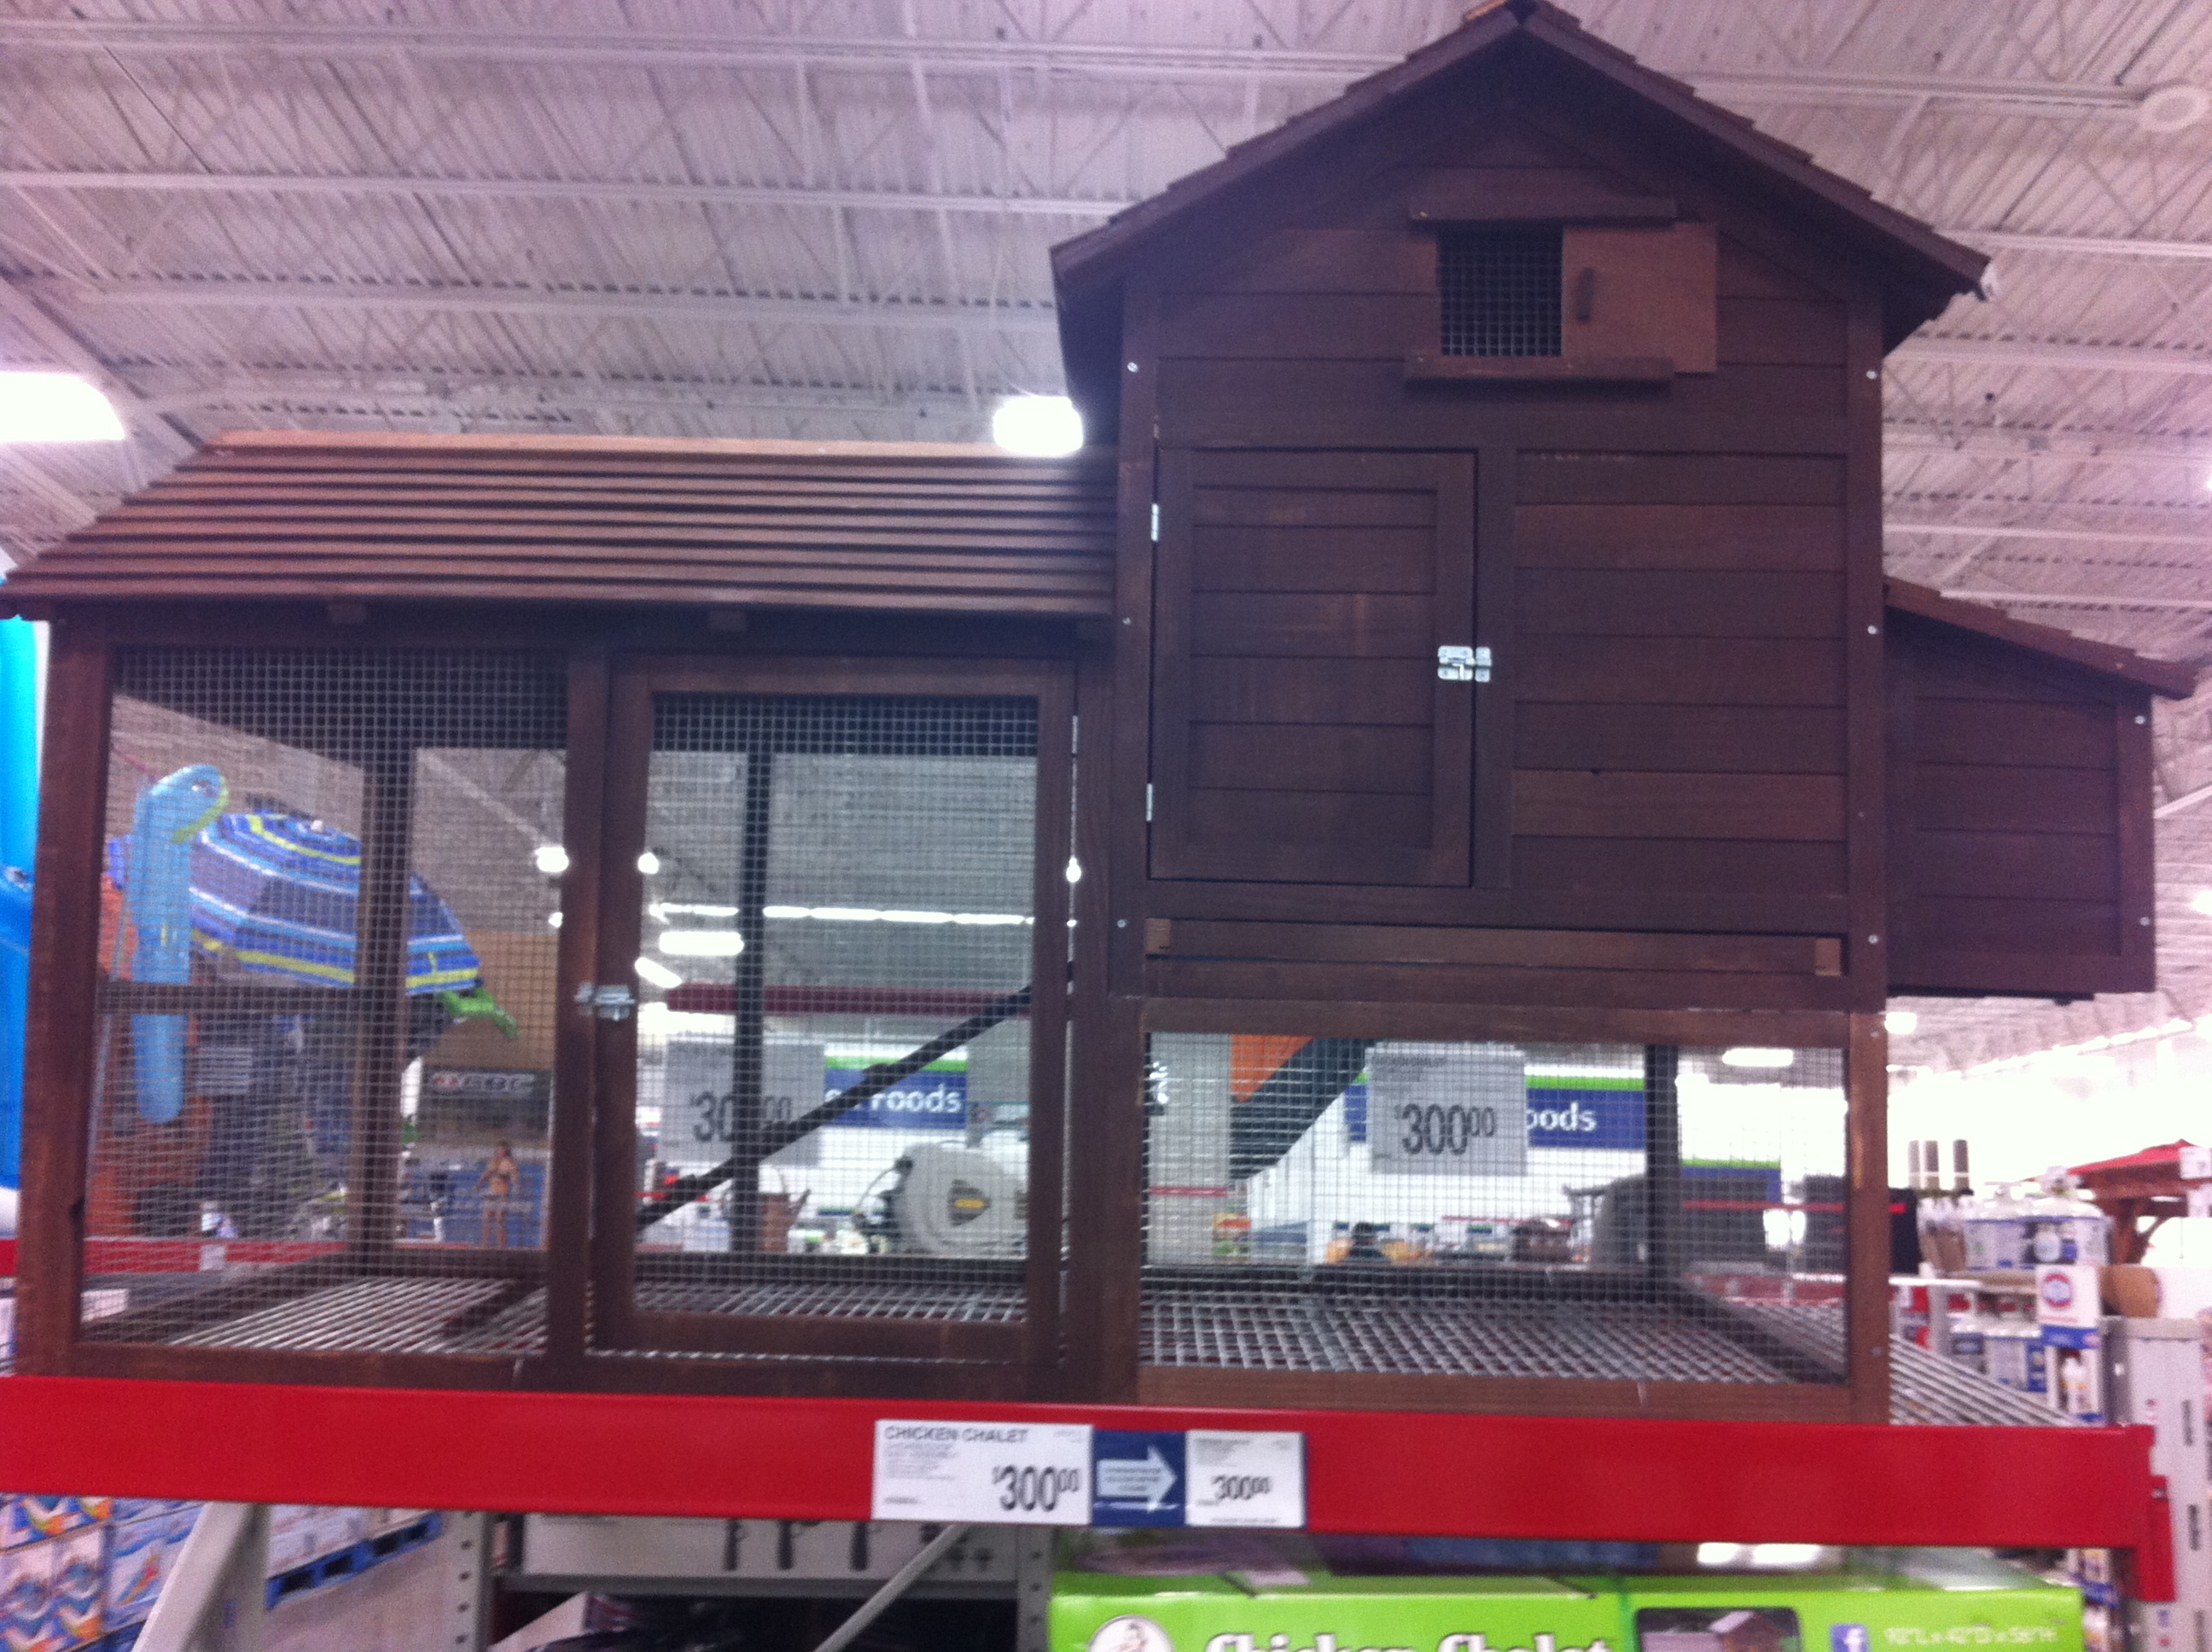 Did you know that Sam’s sold chicken coops?